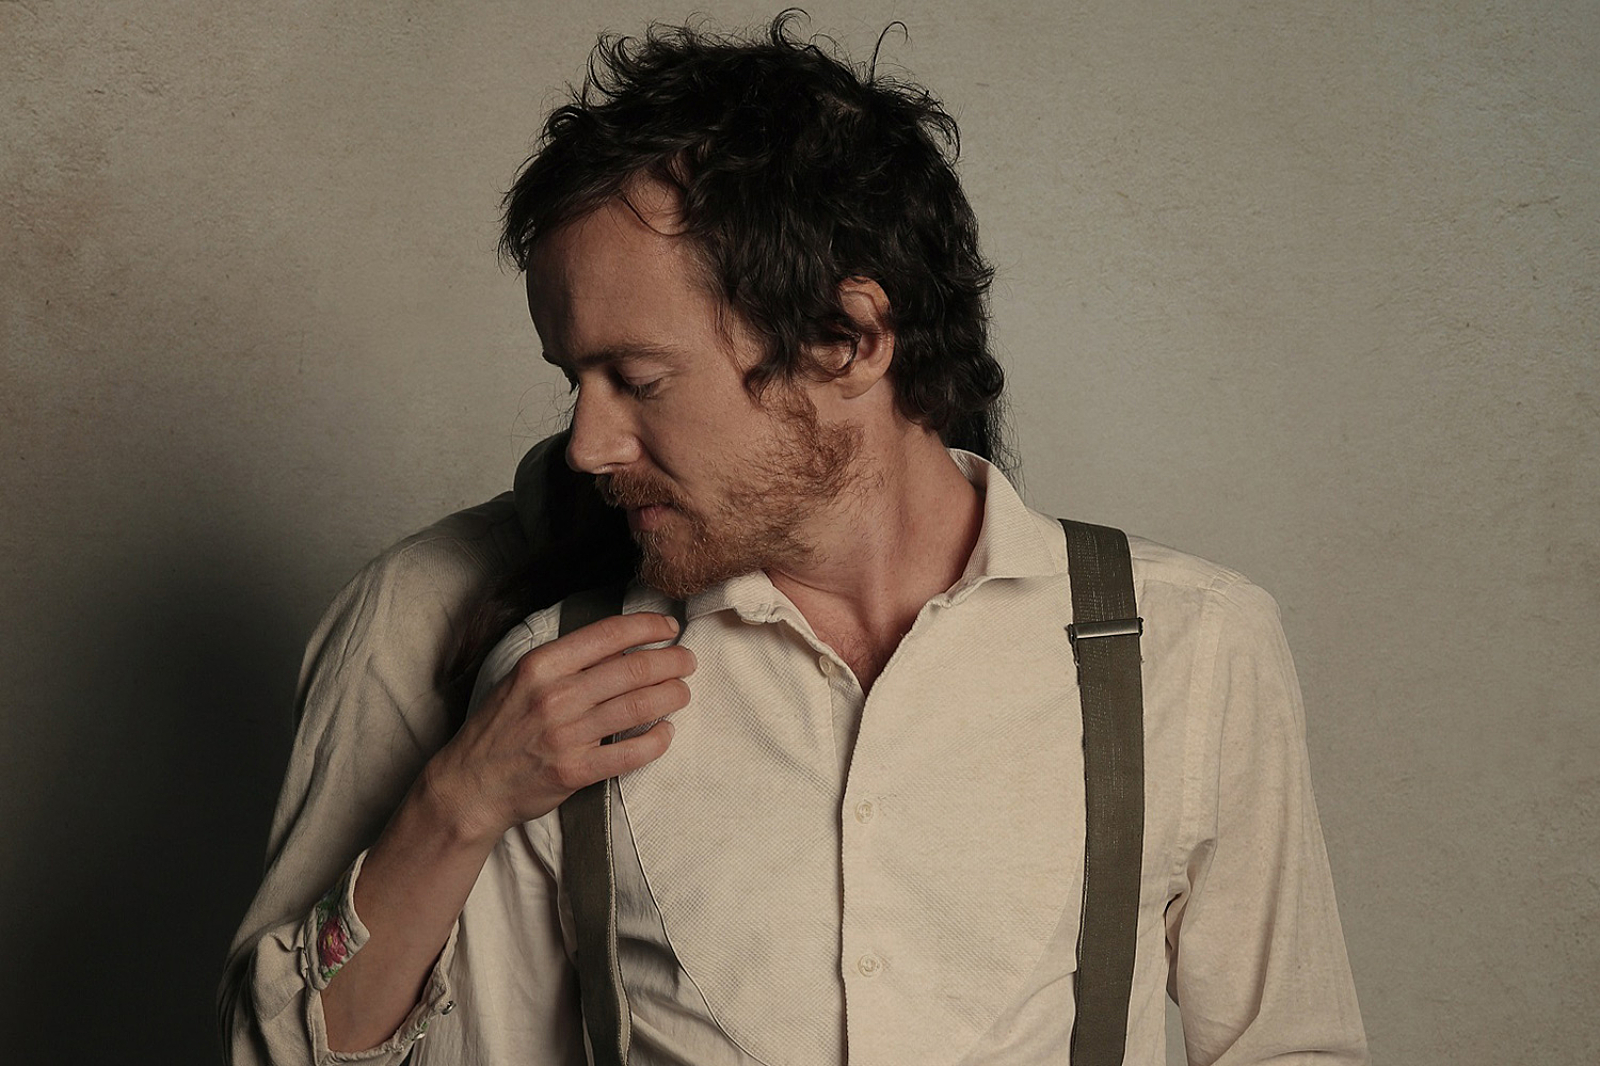 Damien Rice schedules three UK shows for this June